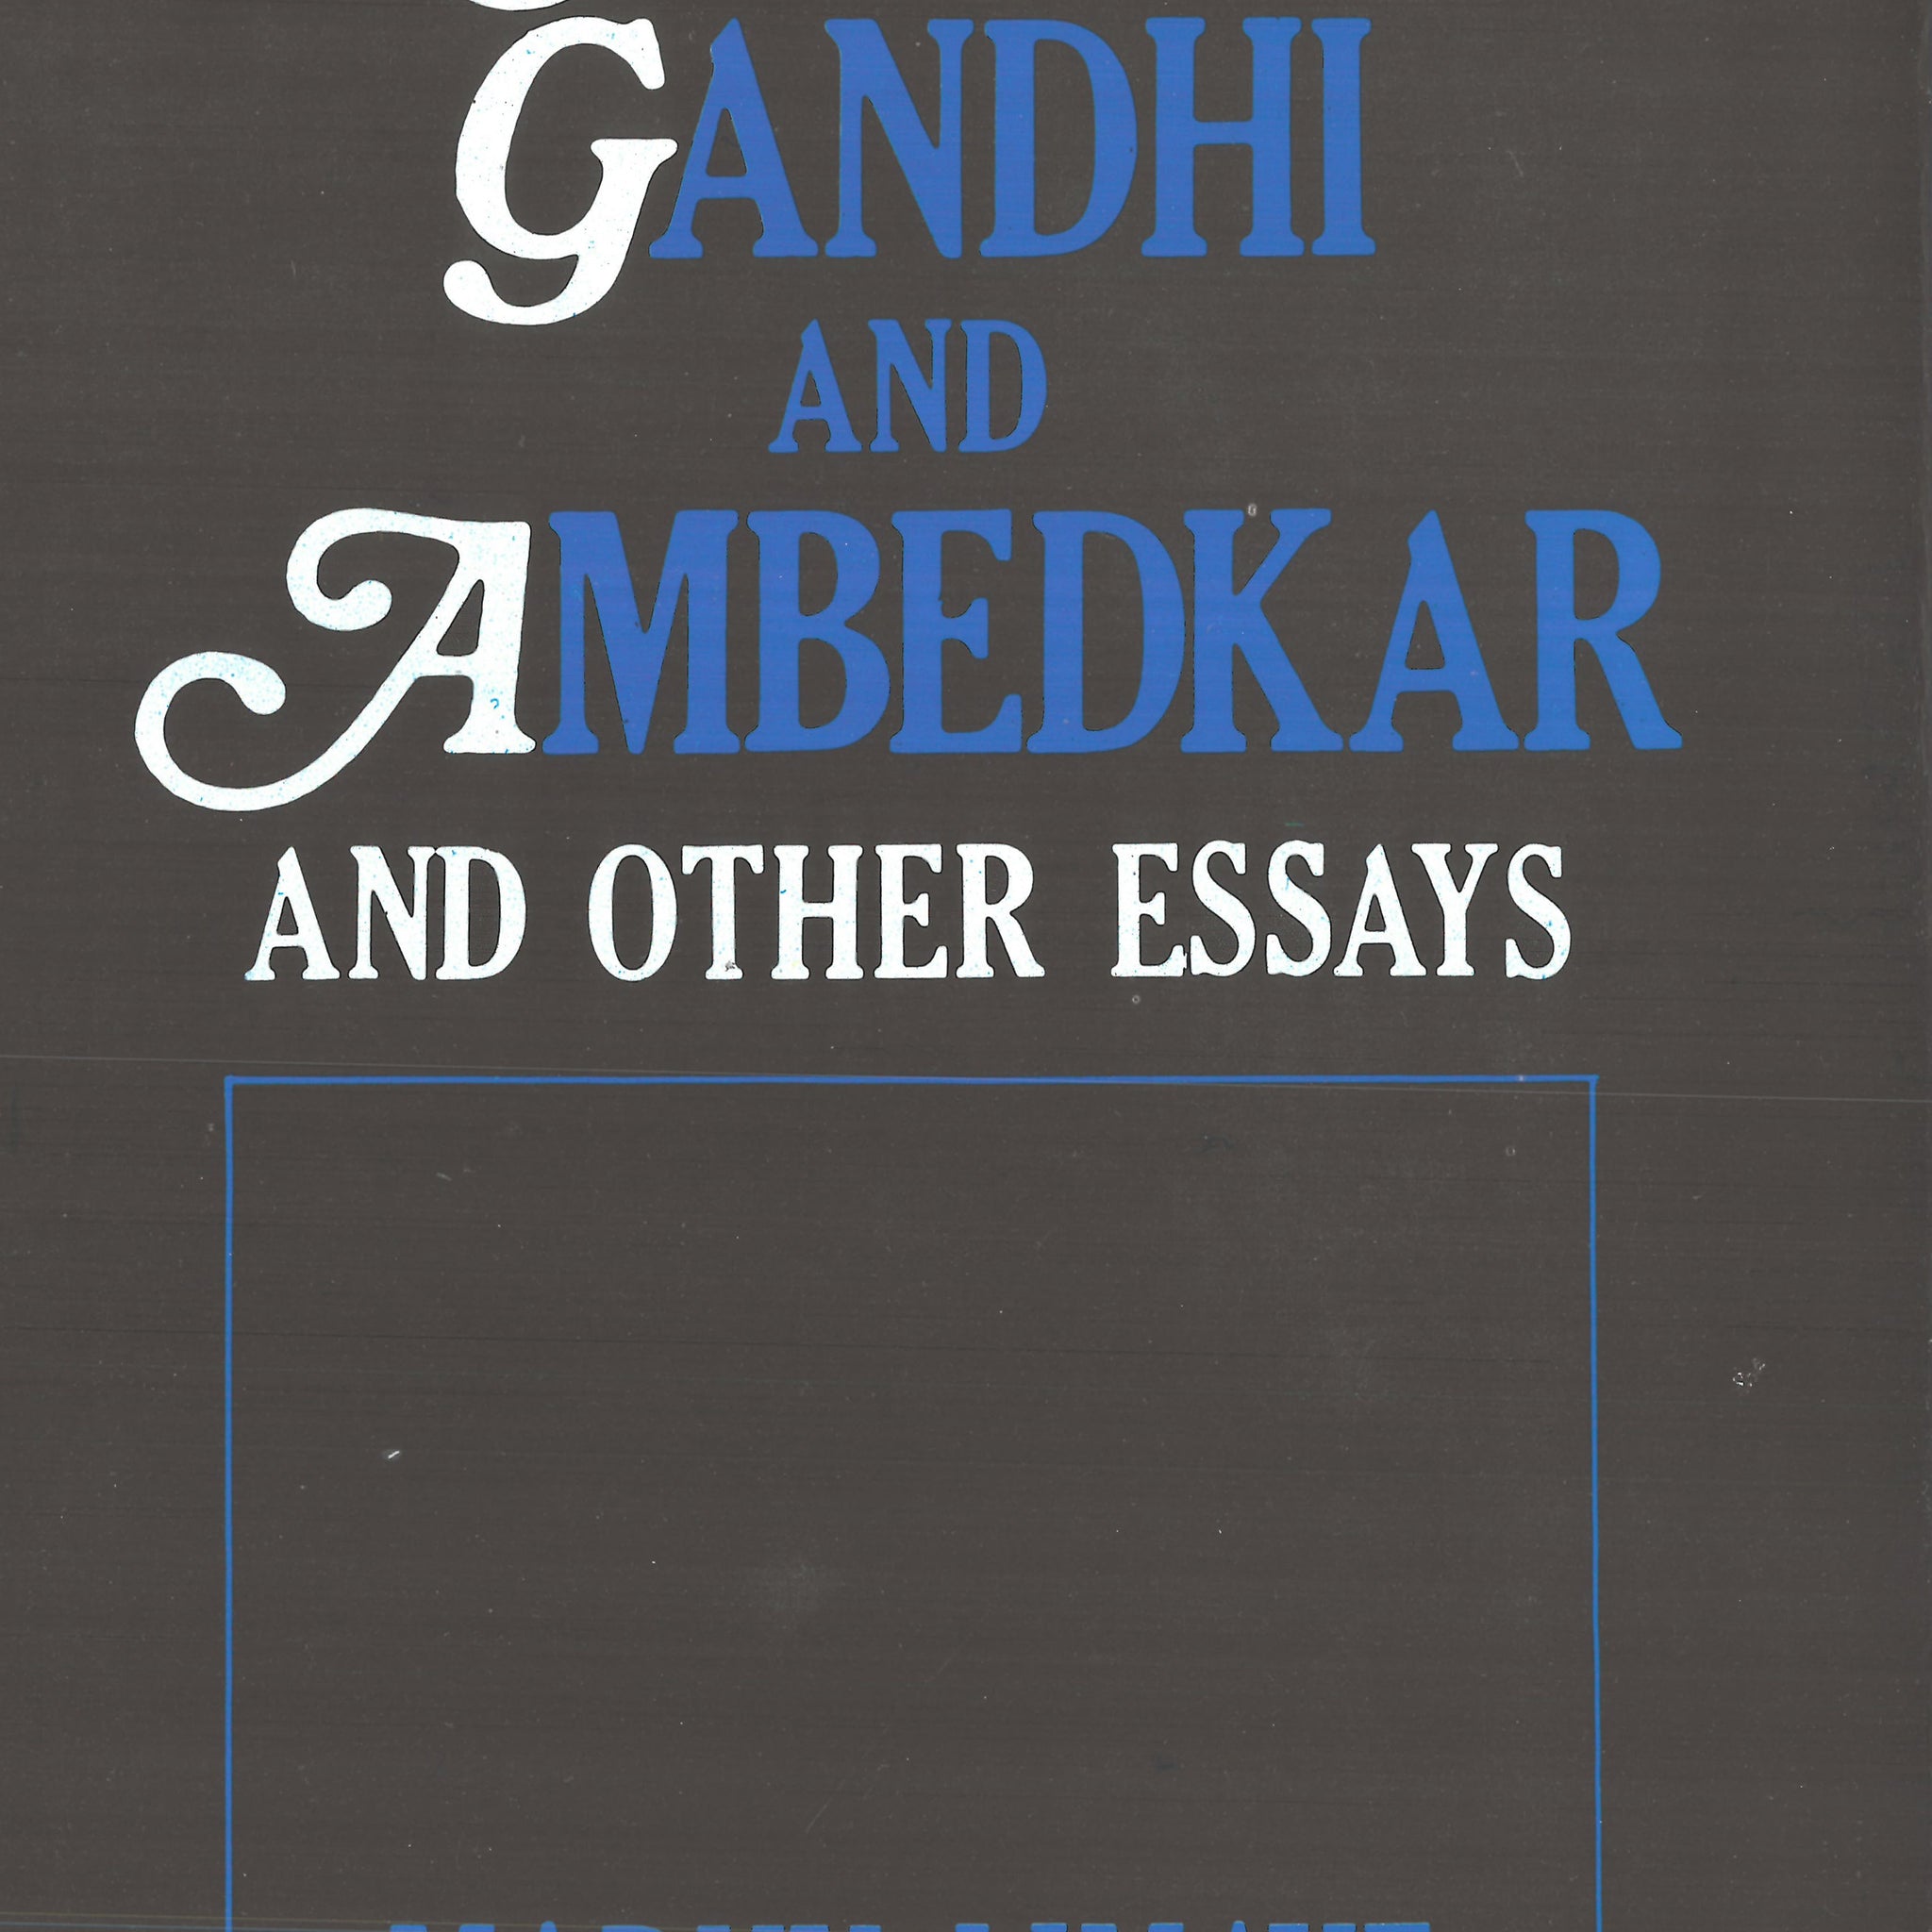 Manu Gandhi and Ambedkar: Policy and Other Essays [Hardcover]